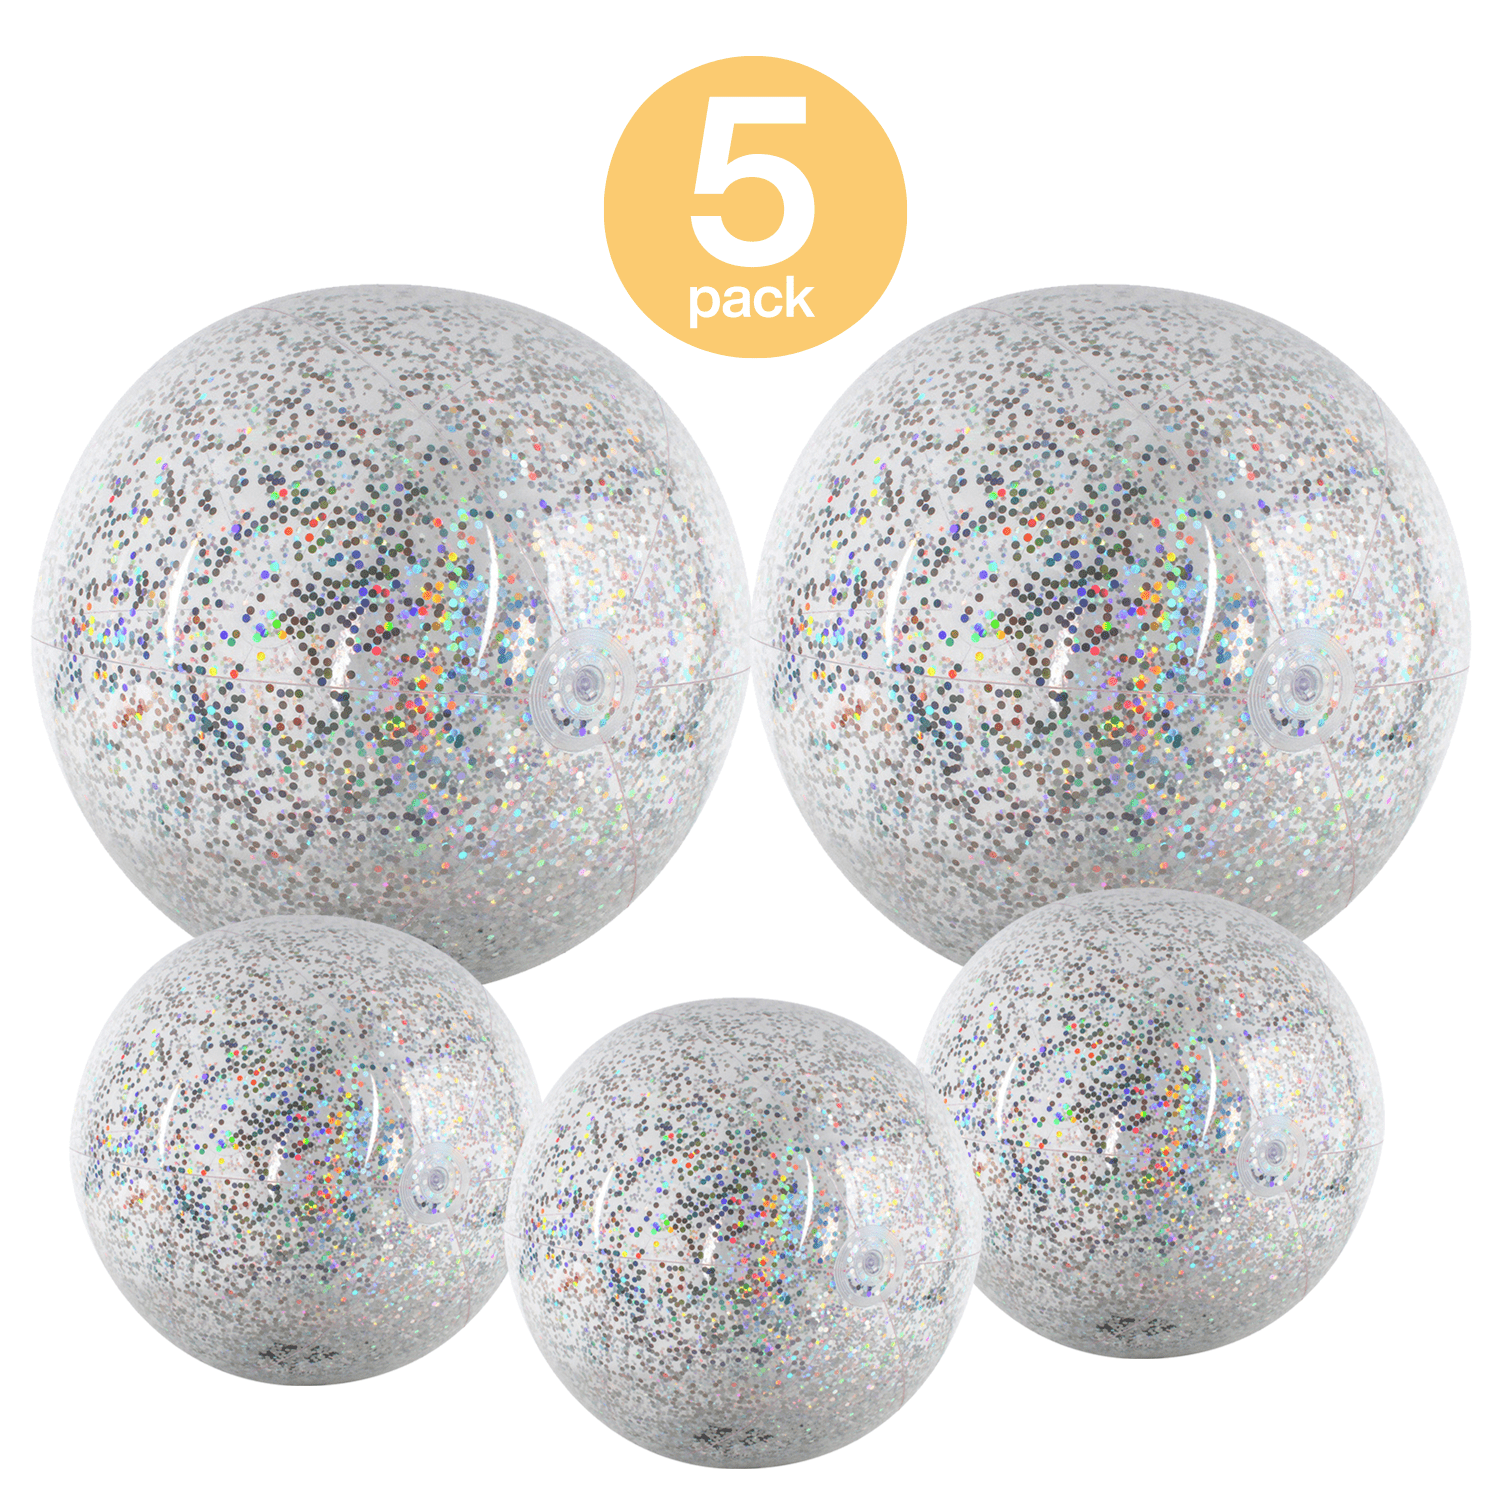 Giant Glitter Beach Ball Summer Swimming Balls Floatable Pool Ball Fun Water Beach Toys Outdoor Summer Party Favors for Kids Adults 16inch DGFH Sequin Glitter Inflatable Beach Ball